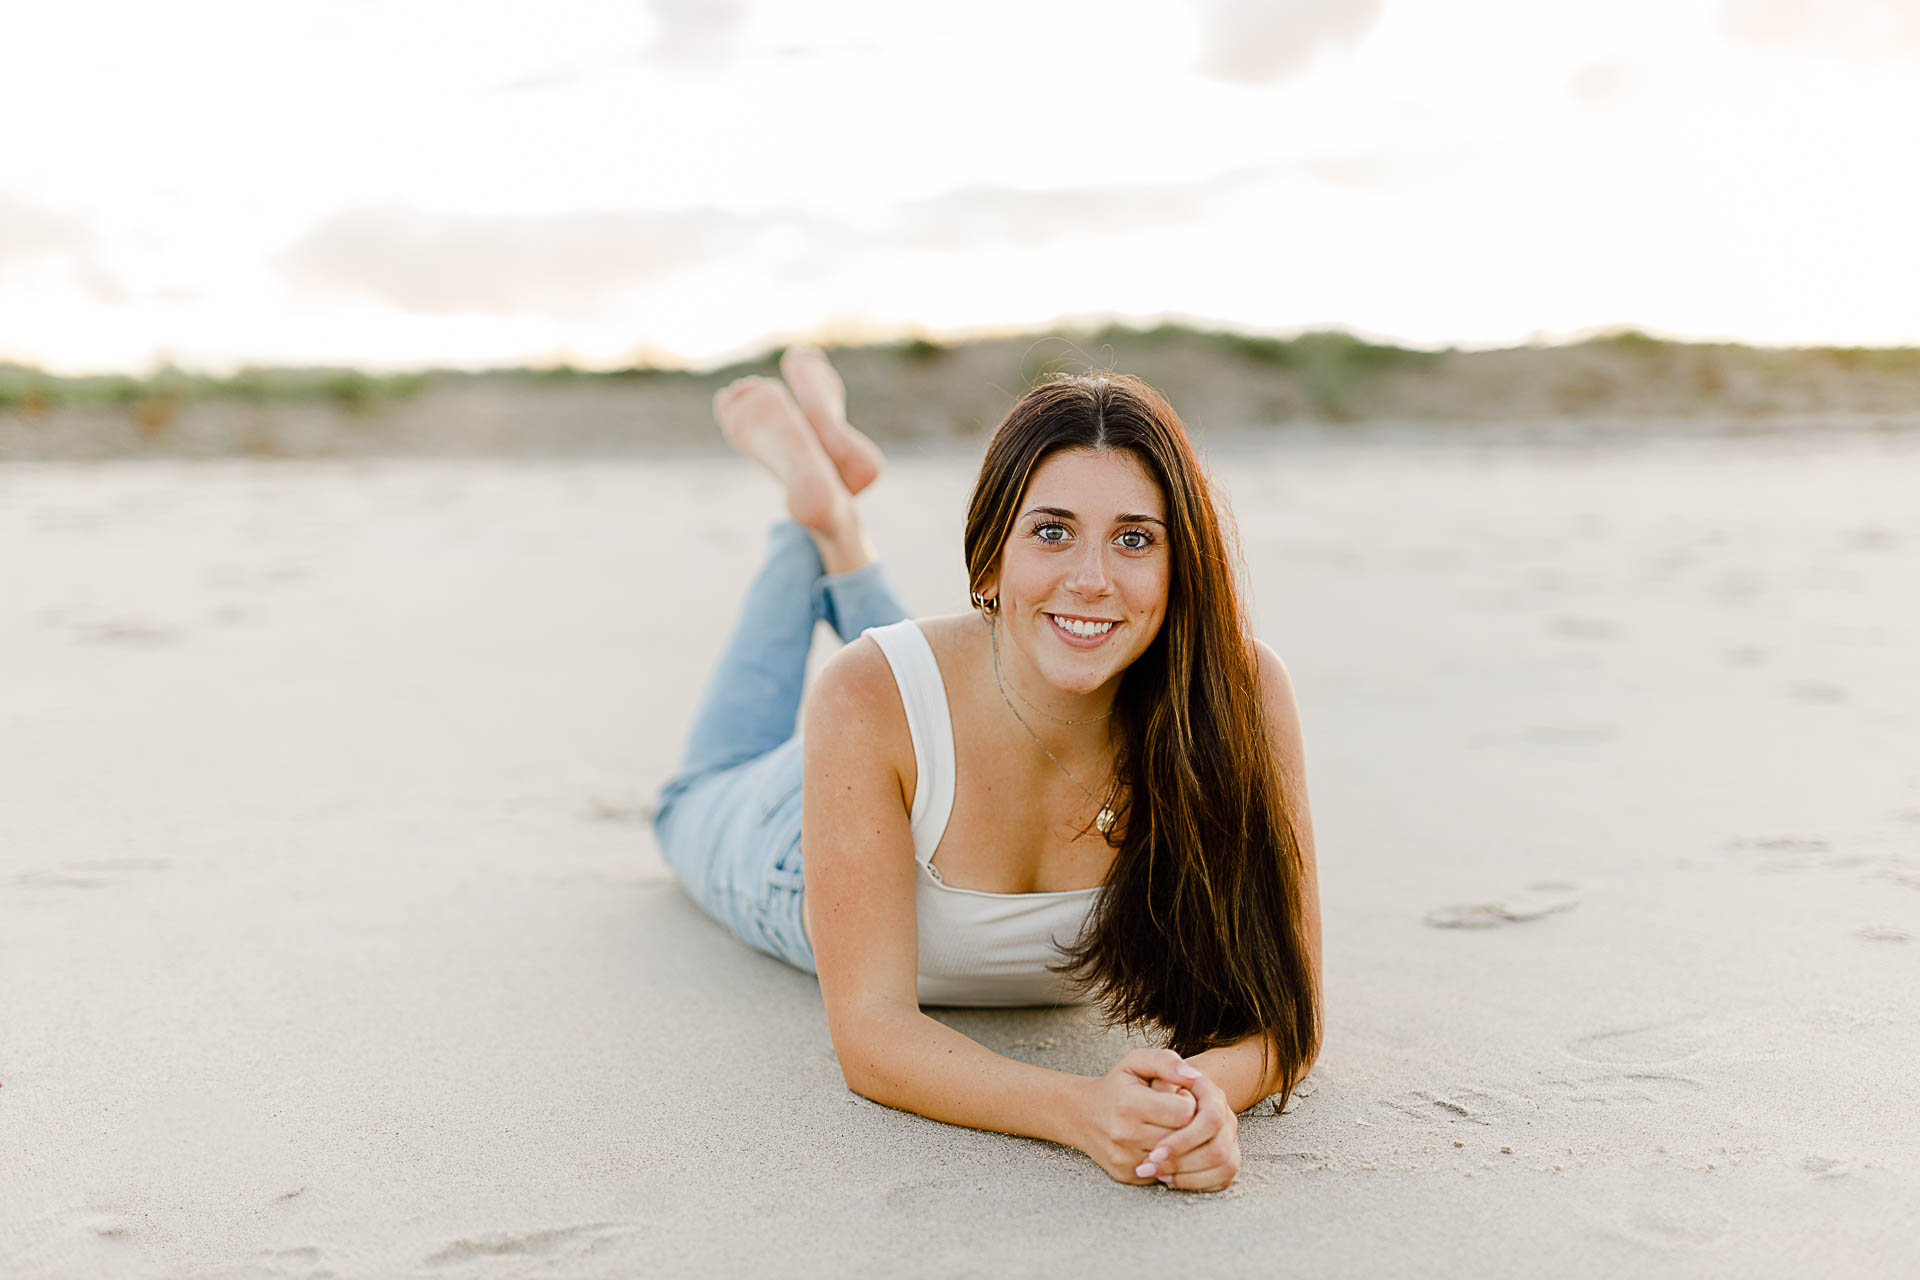 Photo by Norwell Senior Portrait Photographer Christina Runnals | High school girl laying on the beach